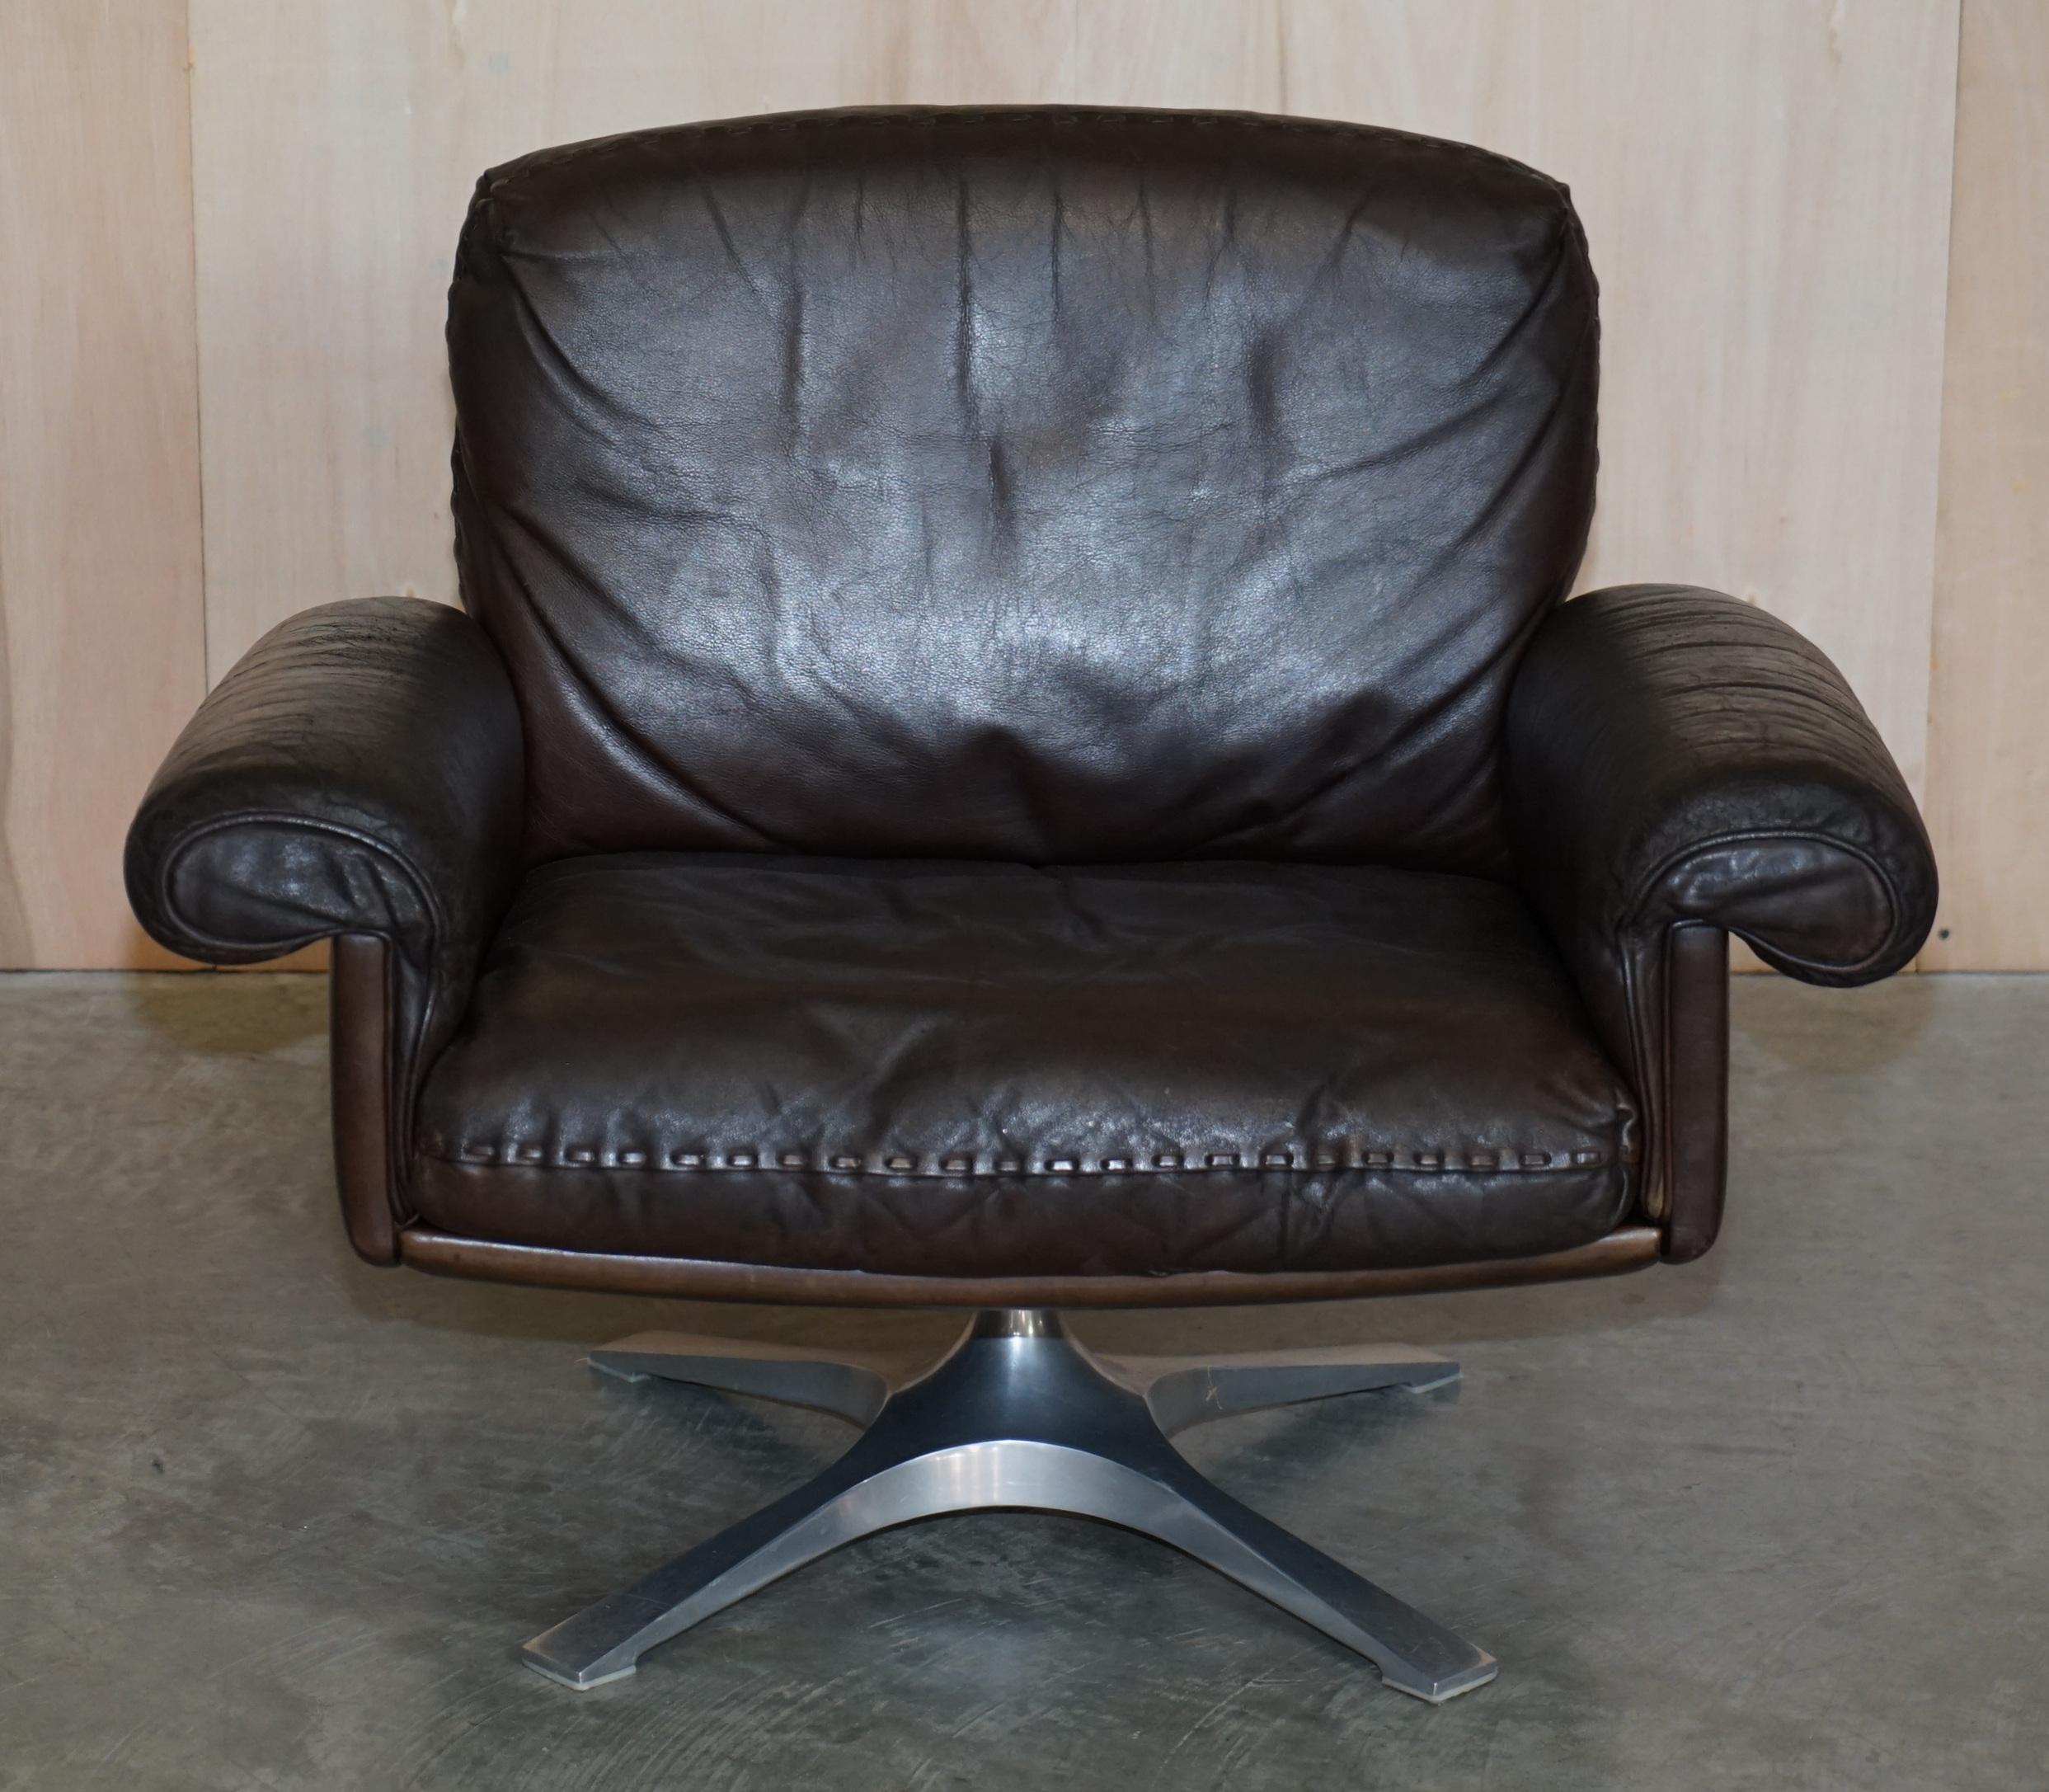 We are delighted to offer for sale this lovely vintage Mid-Century Modern circa 1960’s De Sede DS-35 Swivel armchair with the early prototype base

A truly iconic and super comfortable armchair made by the style gurus and De Sede. The DS-35 has